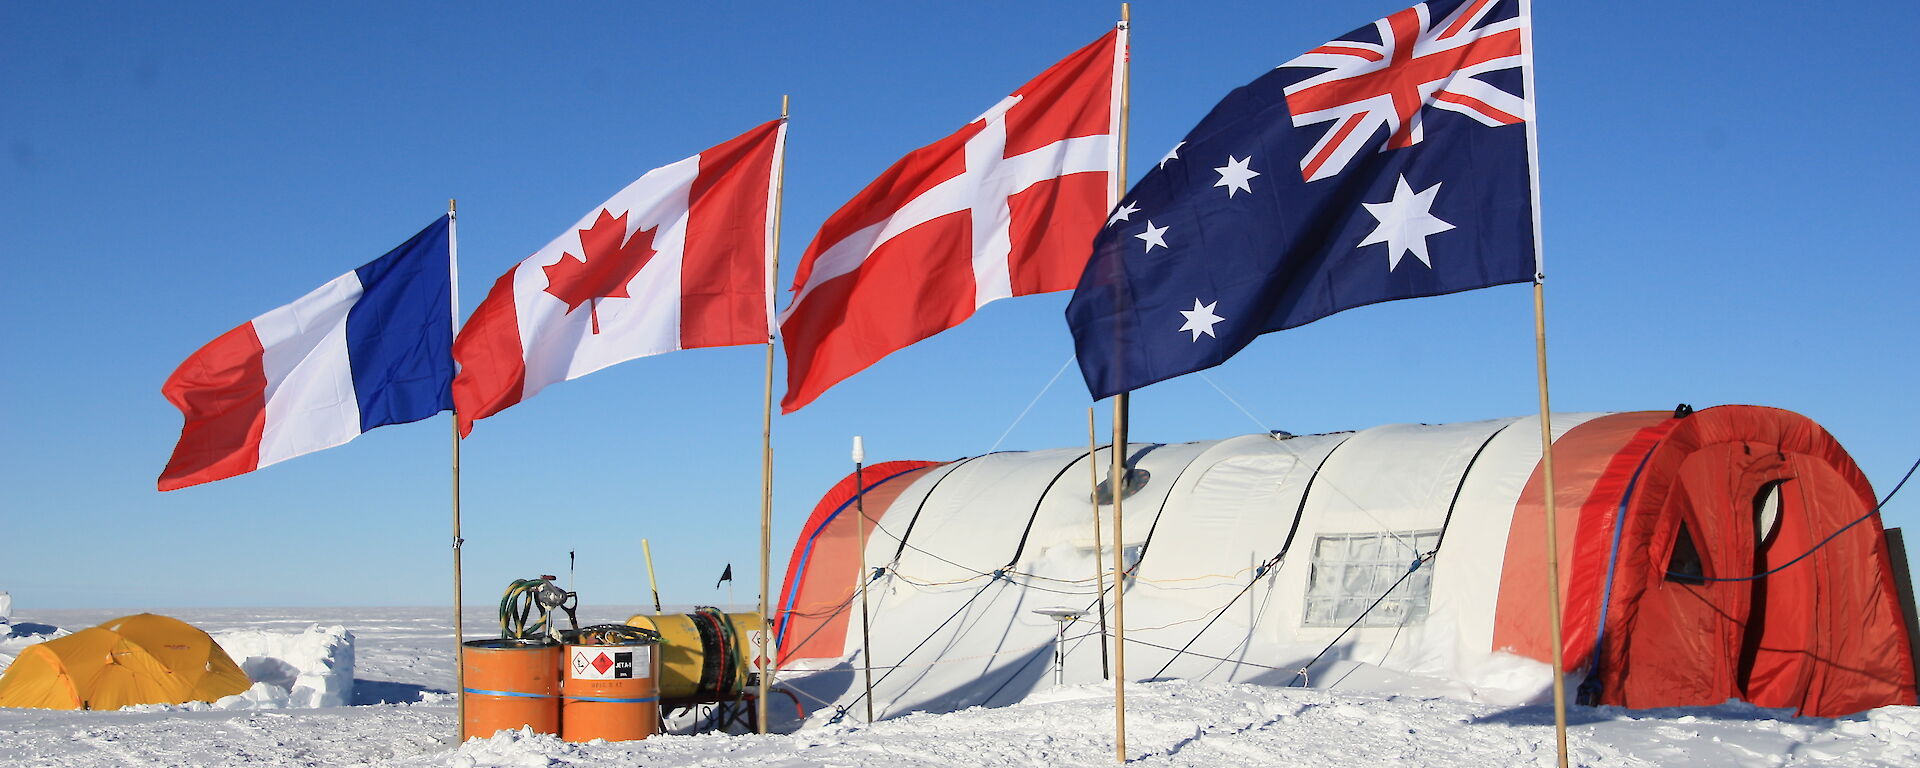 Mount Brown South ice core drill camp showing weather haven tent over the drill site, and international flags of the participating countries